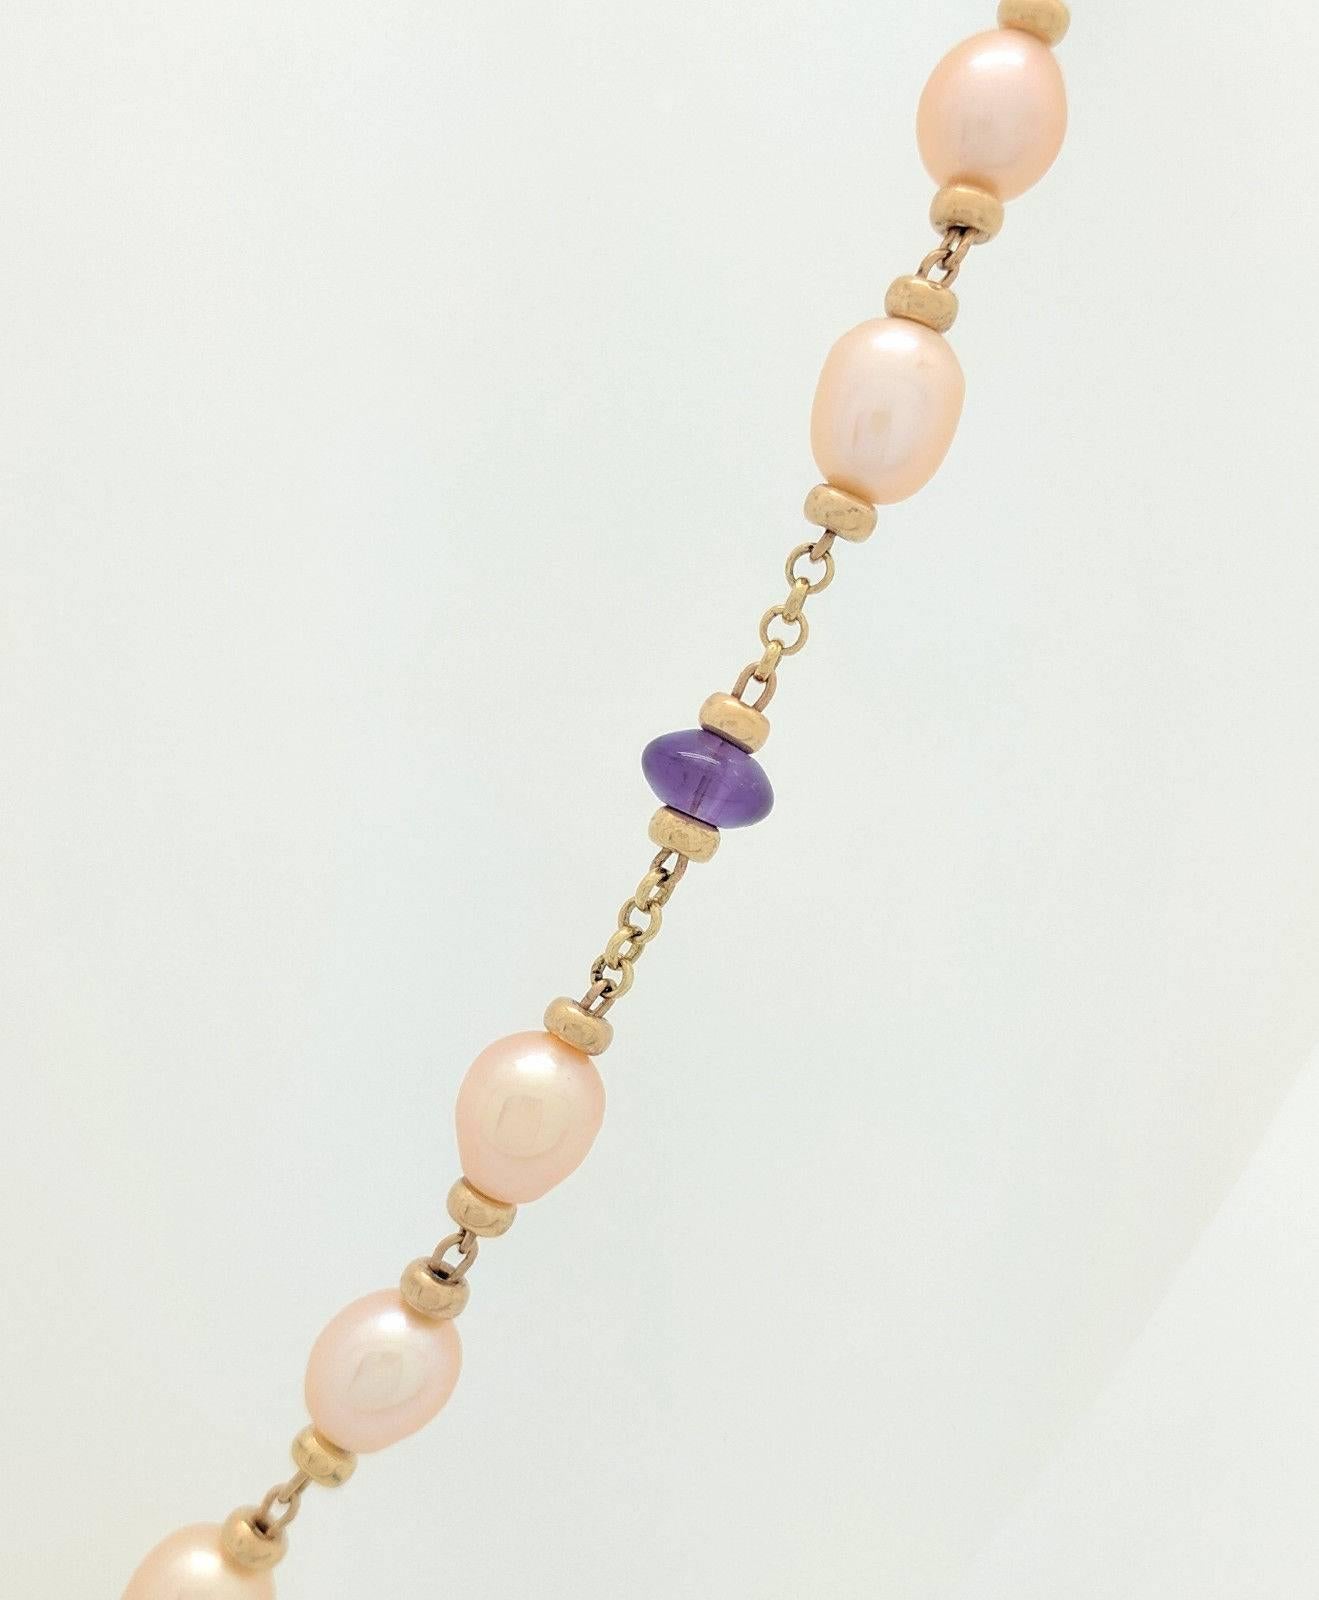 10 Karat Yellow Gold Beaded Cultured Pearl and Amethyst Necklace In Excellent Condition For Sale In Gainesville, FL